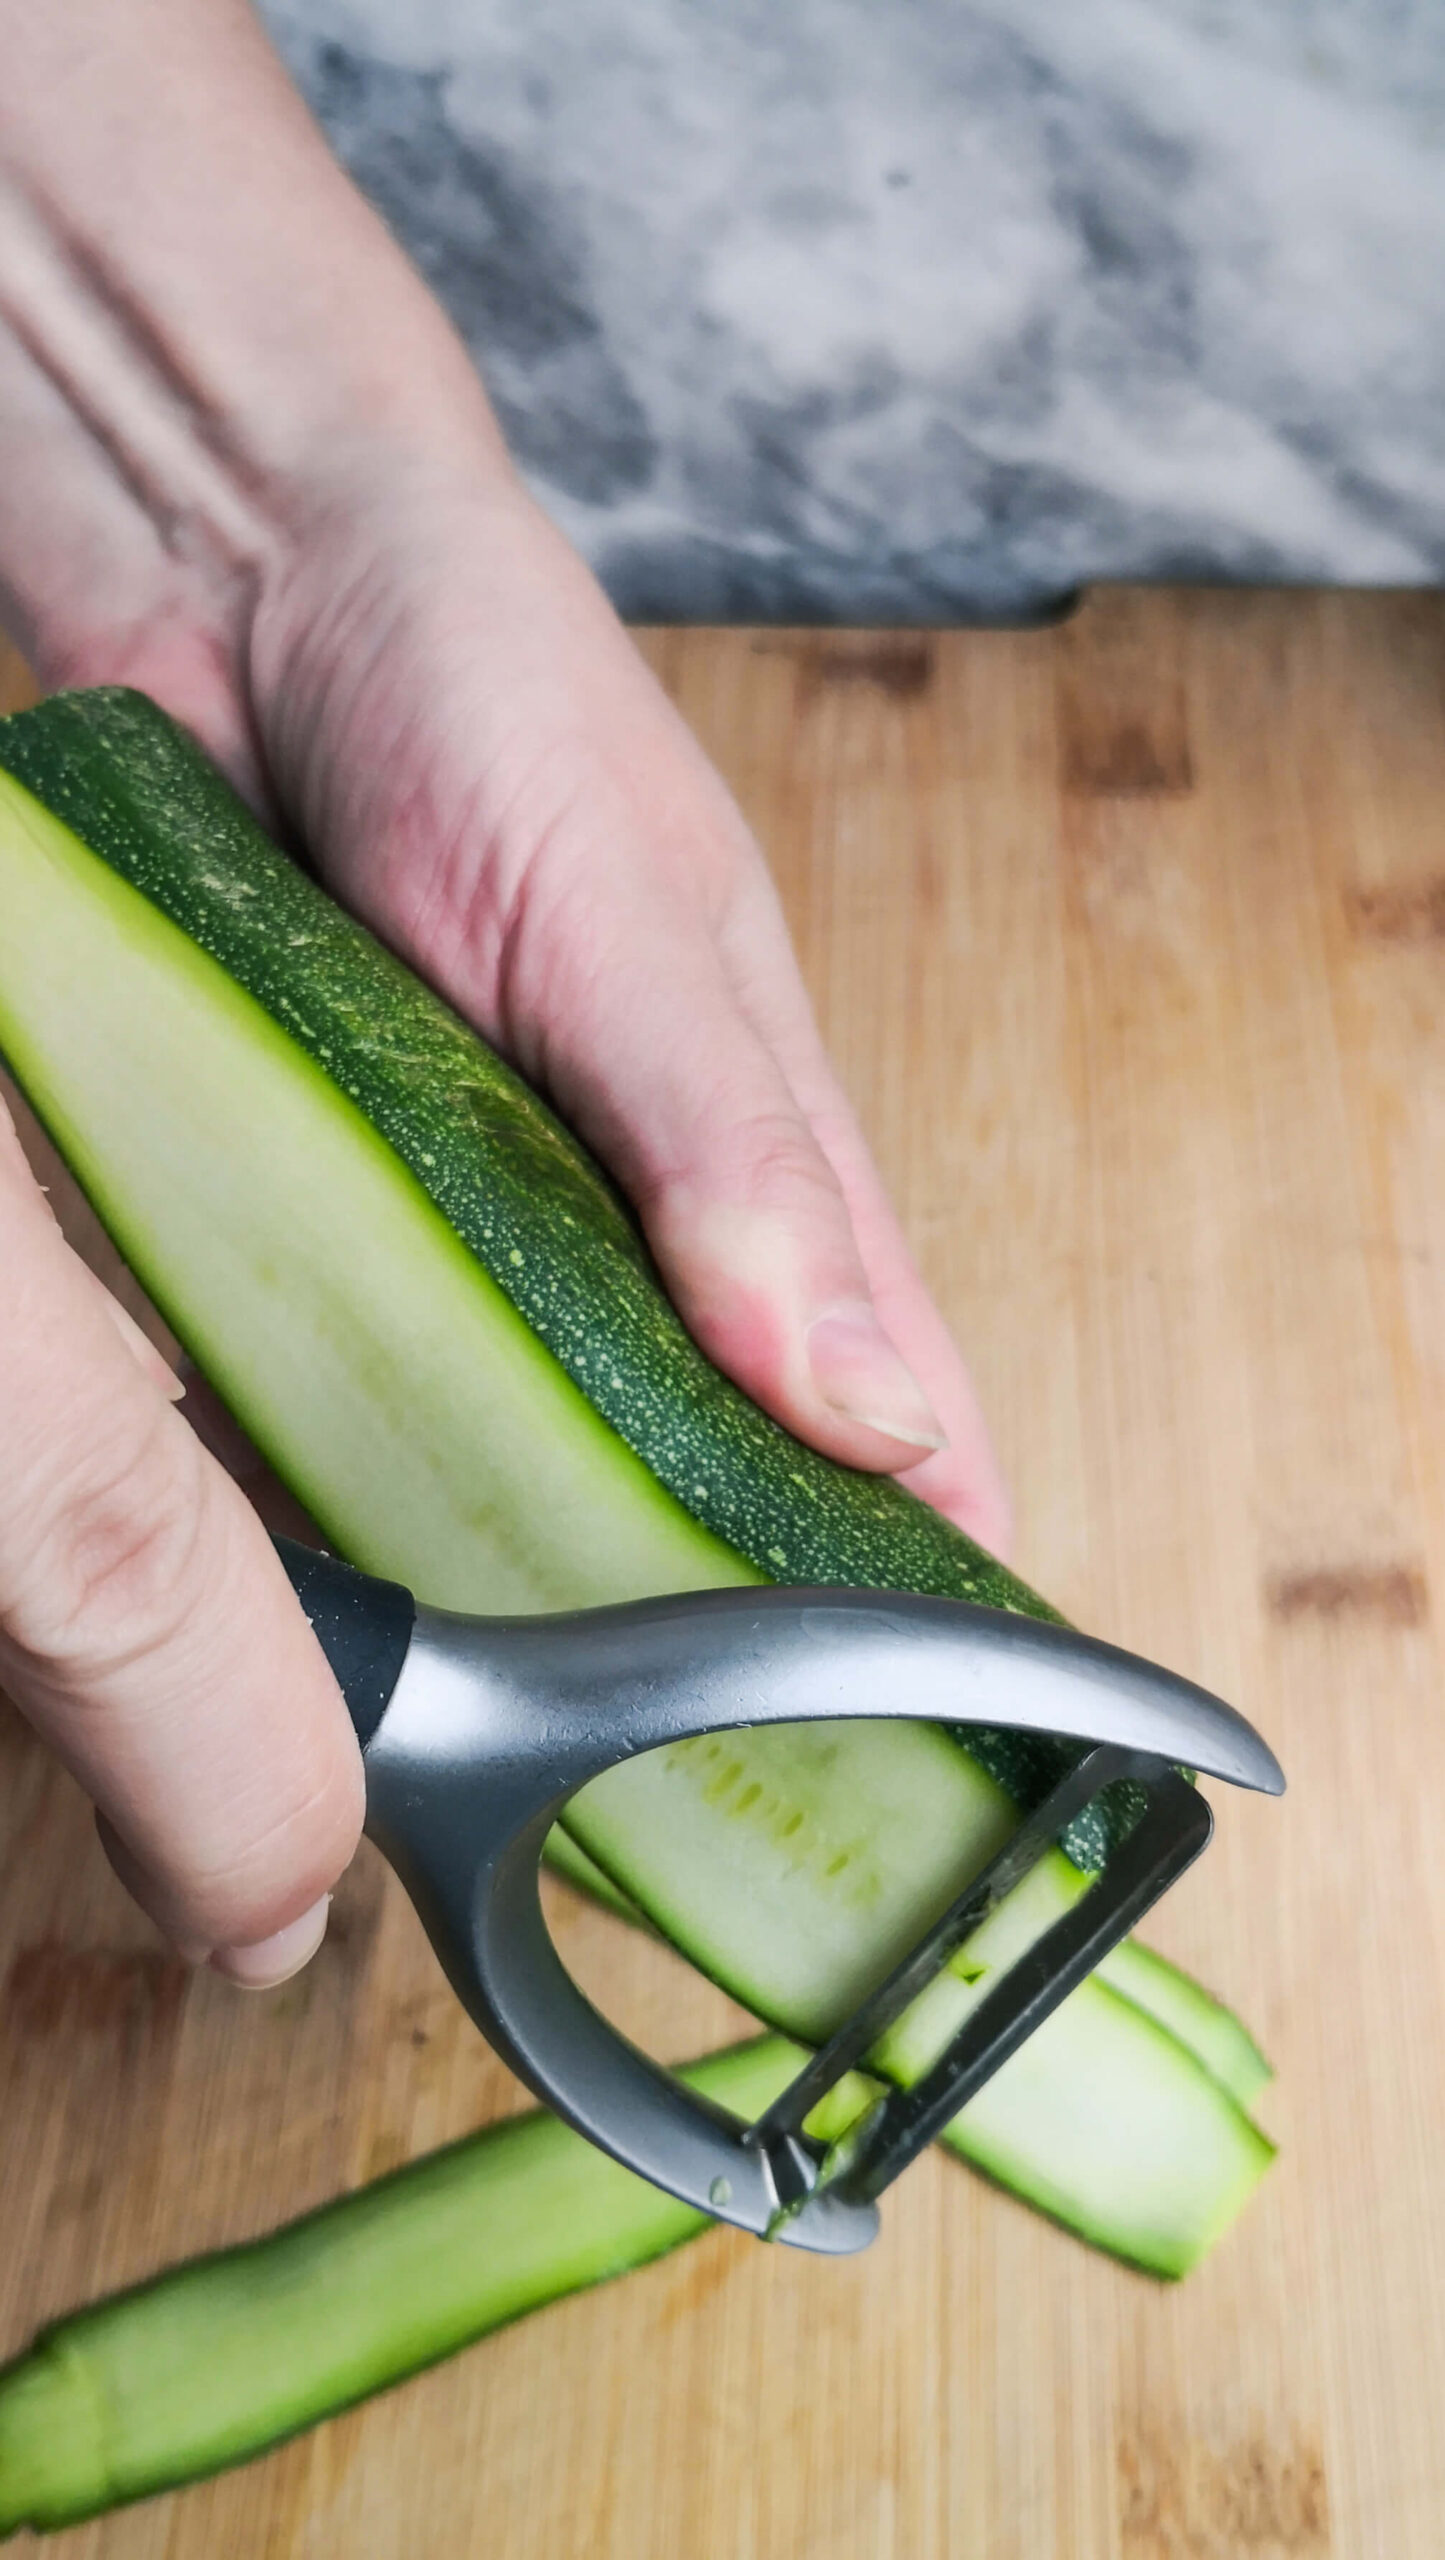 Hand holding a courgette and starting to peel a strip off with a vegetable peeler.